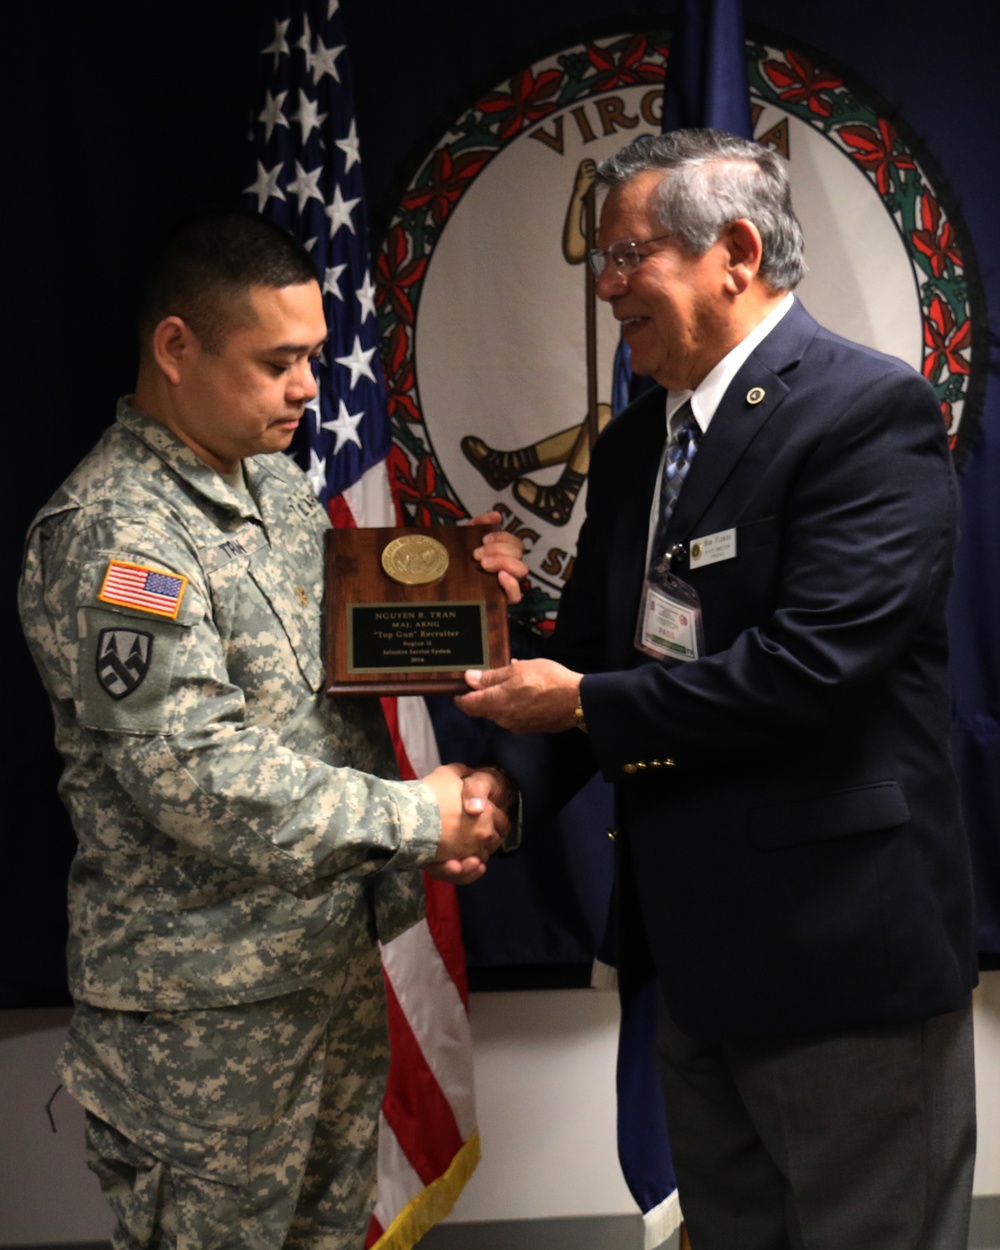 Va. Guard Officer honored by Selective Service